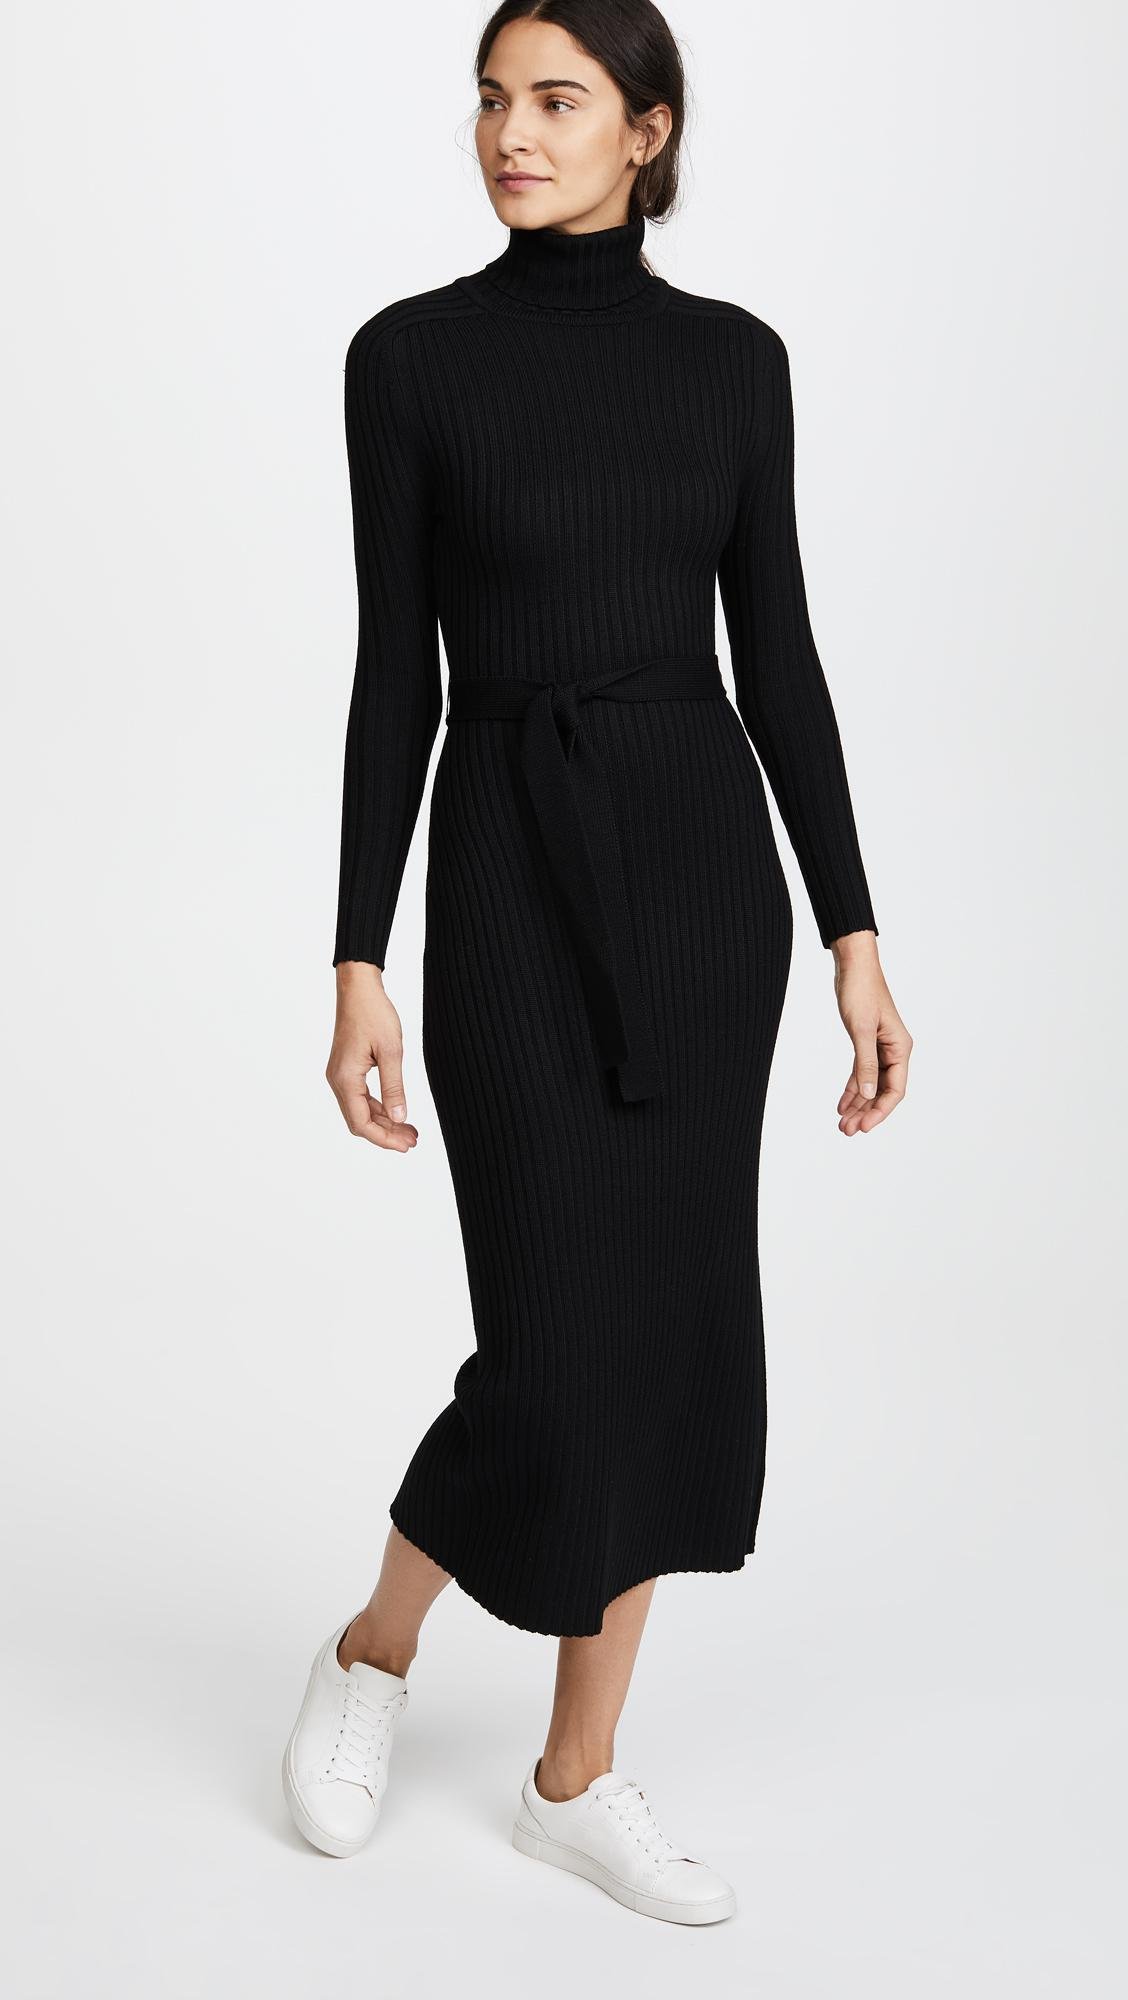 Lyst - Tome Long Sleeve Turtleneck Maxi Dress in Black